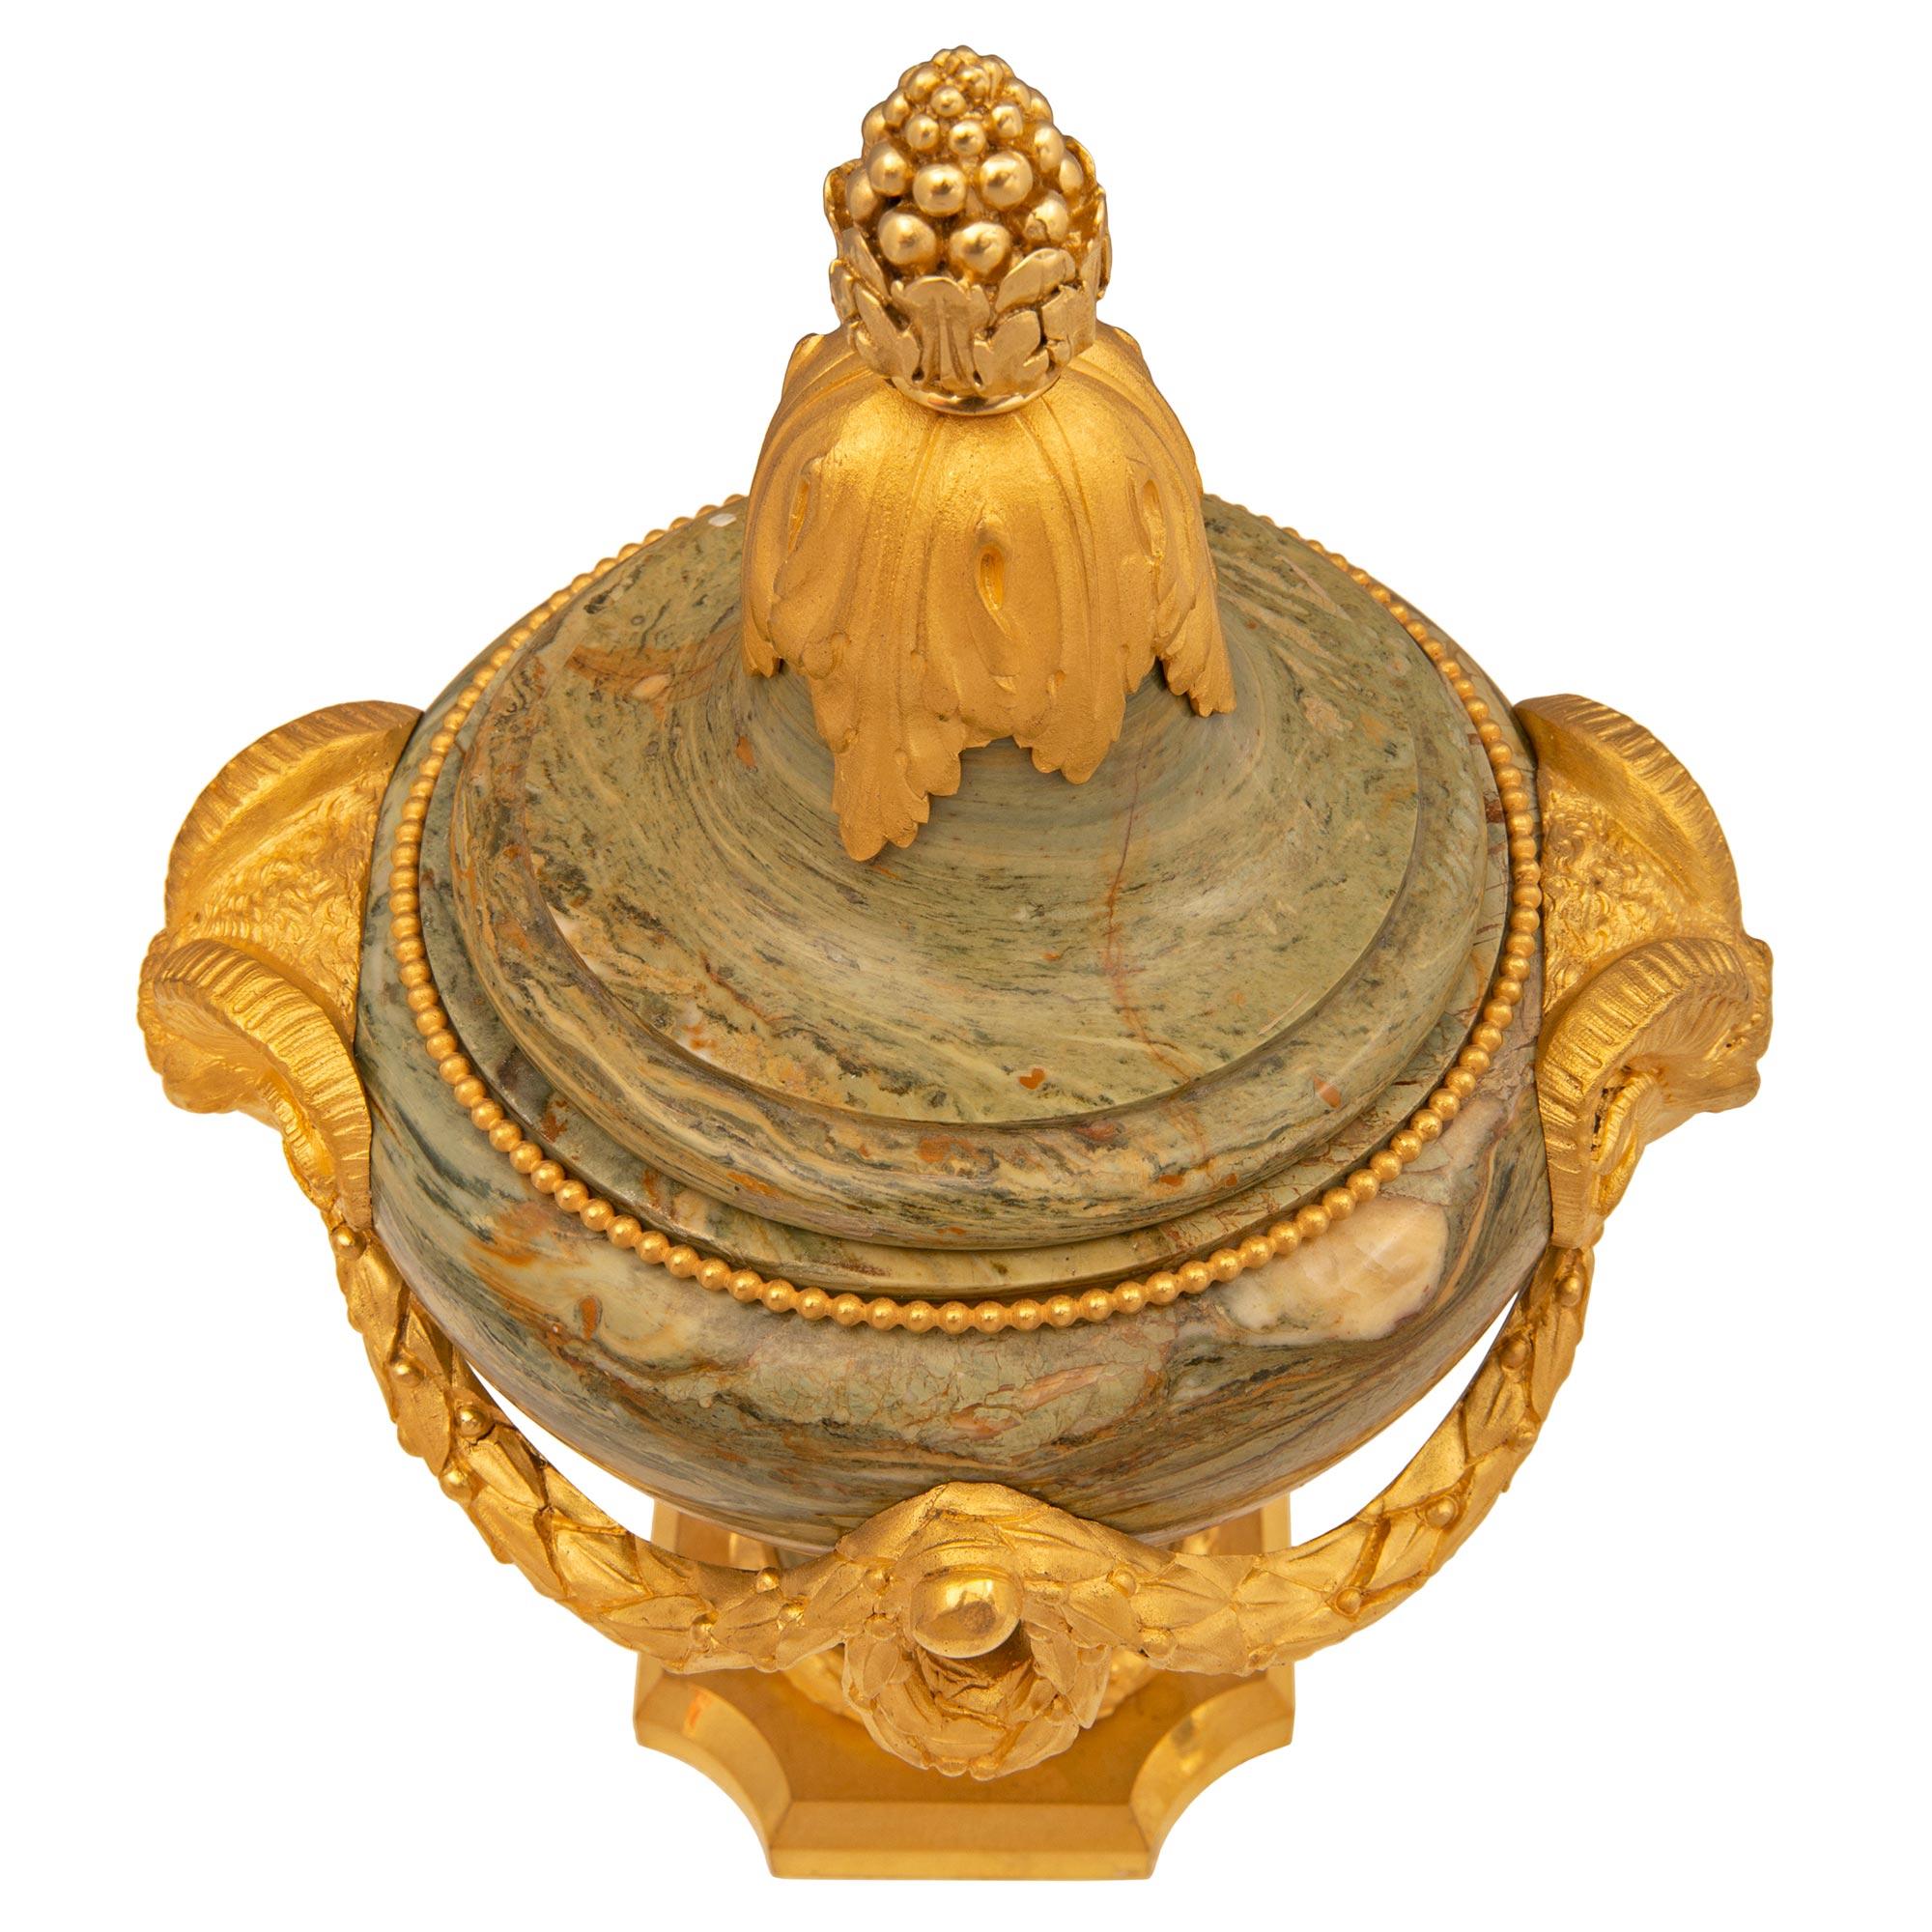 A remarkable and very high quality pair of French 19th century Louis XVI st. Belle Époque period ormolu and Verde marble urns. Each urn is raised by an elegant square ormolu base with concave corners and a fine mottled border. The socle shaped